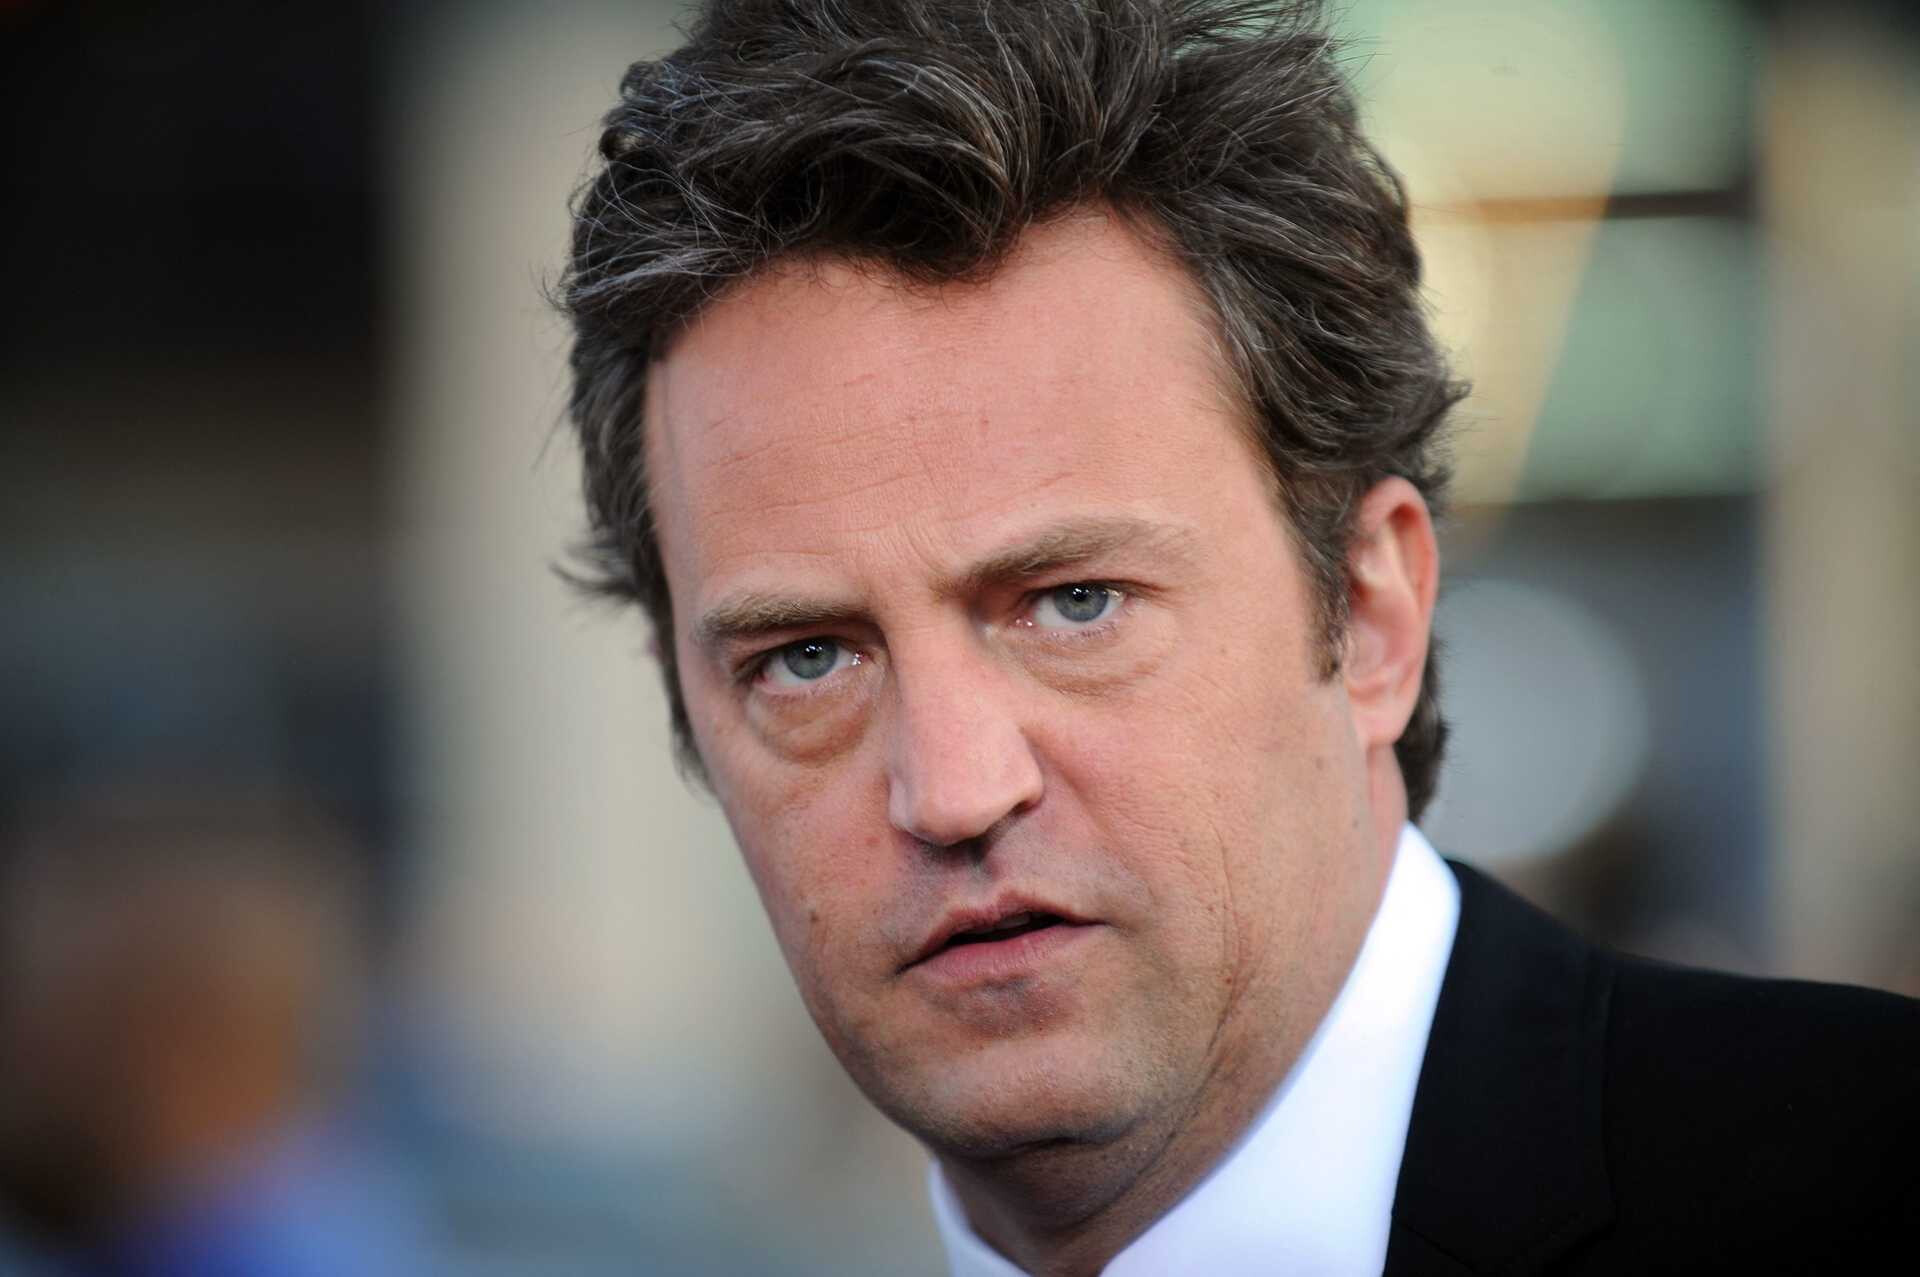 Authorities are expected to charge “several people” in Matthew Perry's death